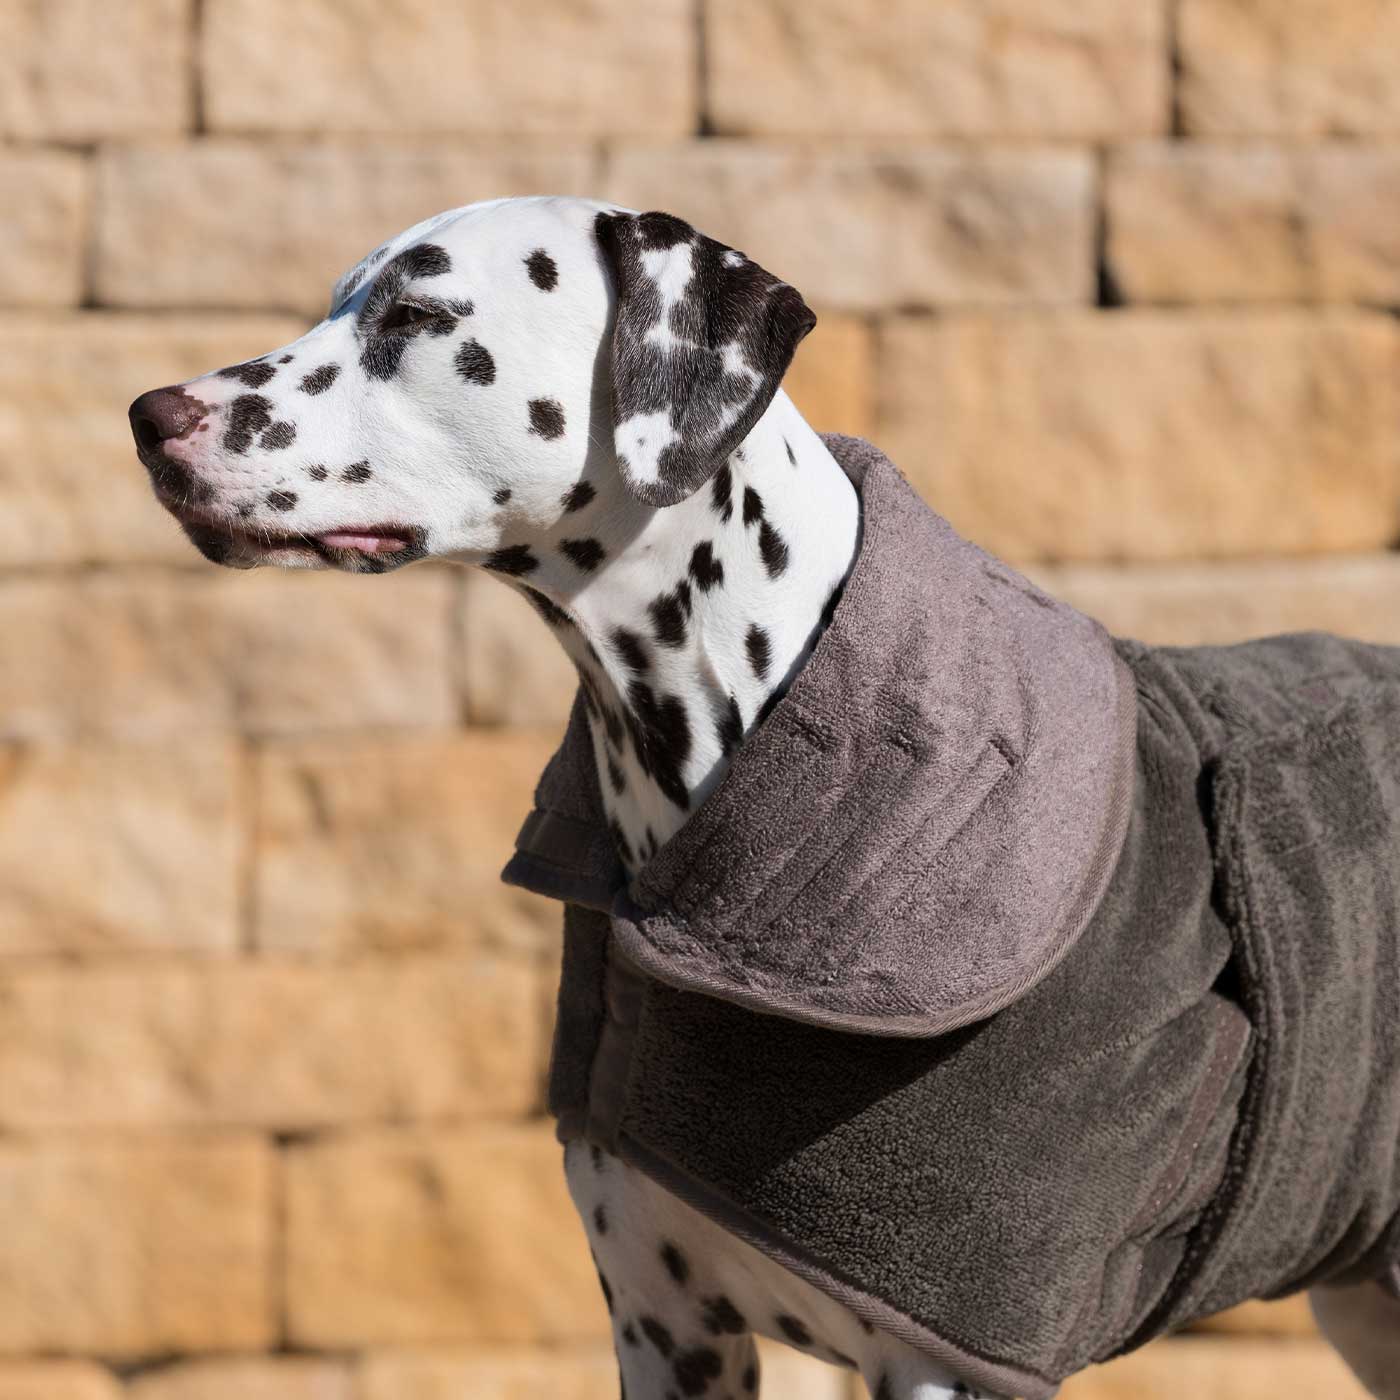 Discover the perfect dog drying with our bamboo dog drying coat in Mole (Brown) The ideal choice for pet drying after walking and bath-time. Made using luxurious bamboo to aid sensitive skin! Available to personalize now at Lords & Labradors US, in 5 sizes and 4 beautiful colors!